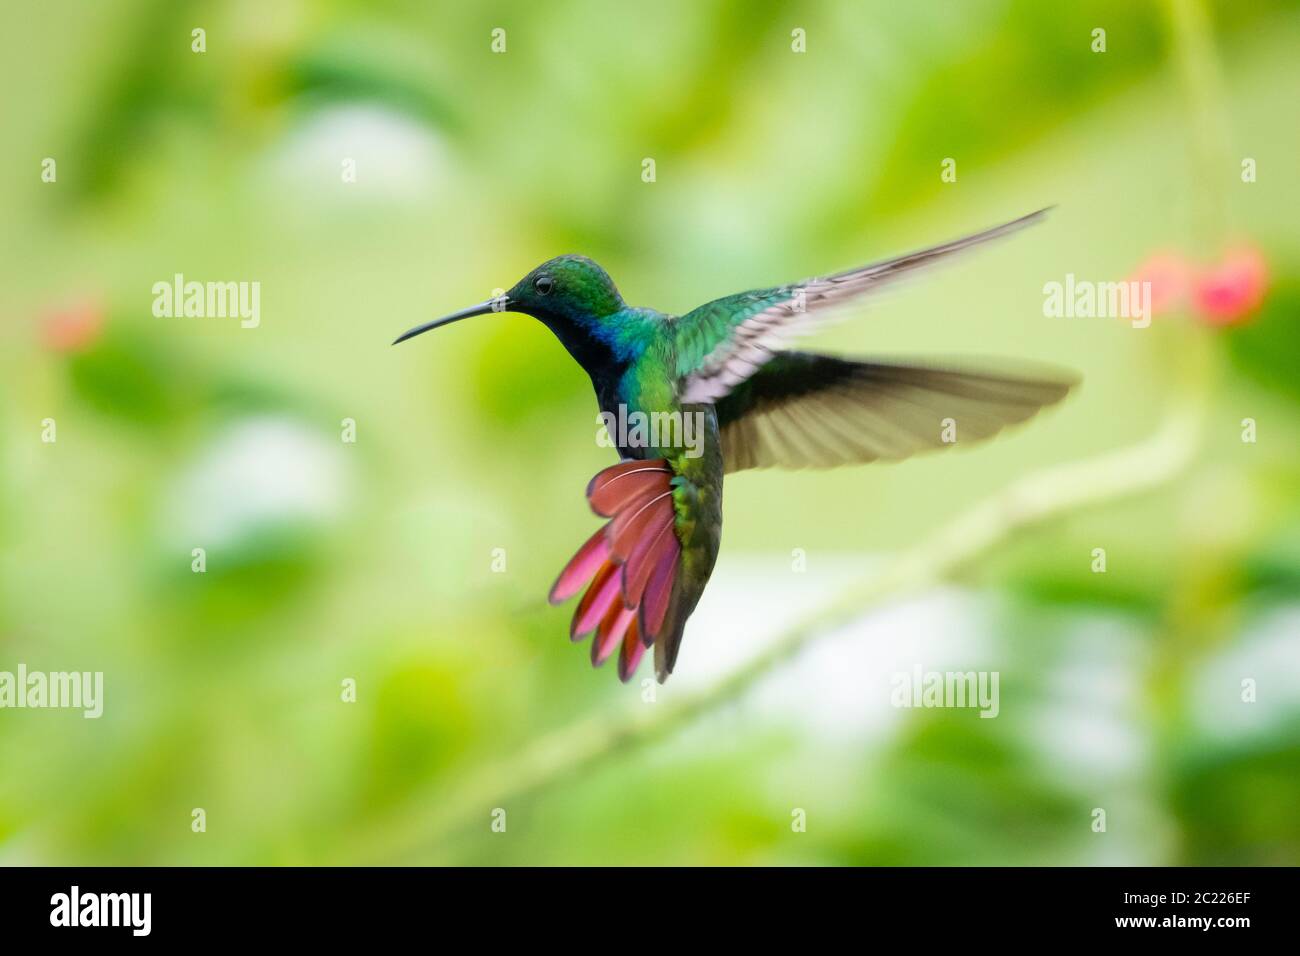 A Black-throated Mango hummingbird hovering in the air with his tail flared. Stock Photo